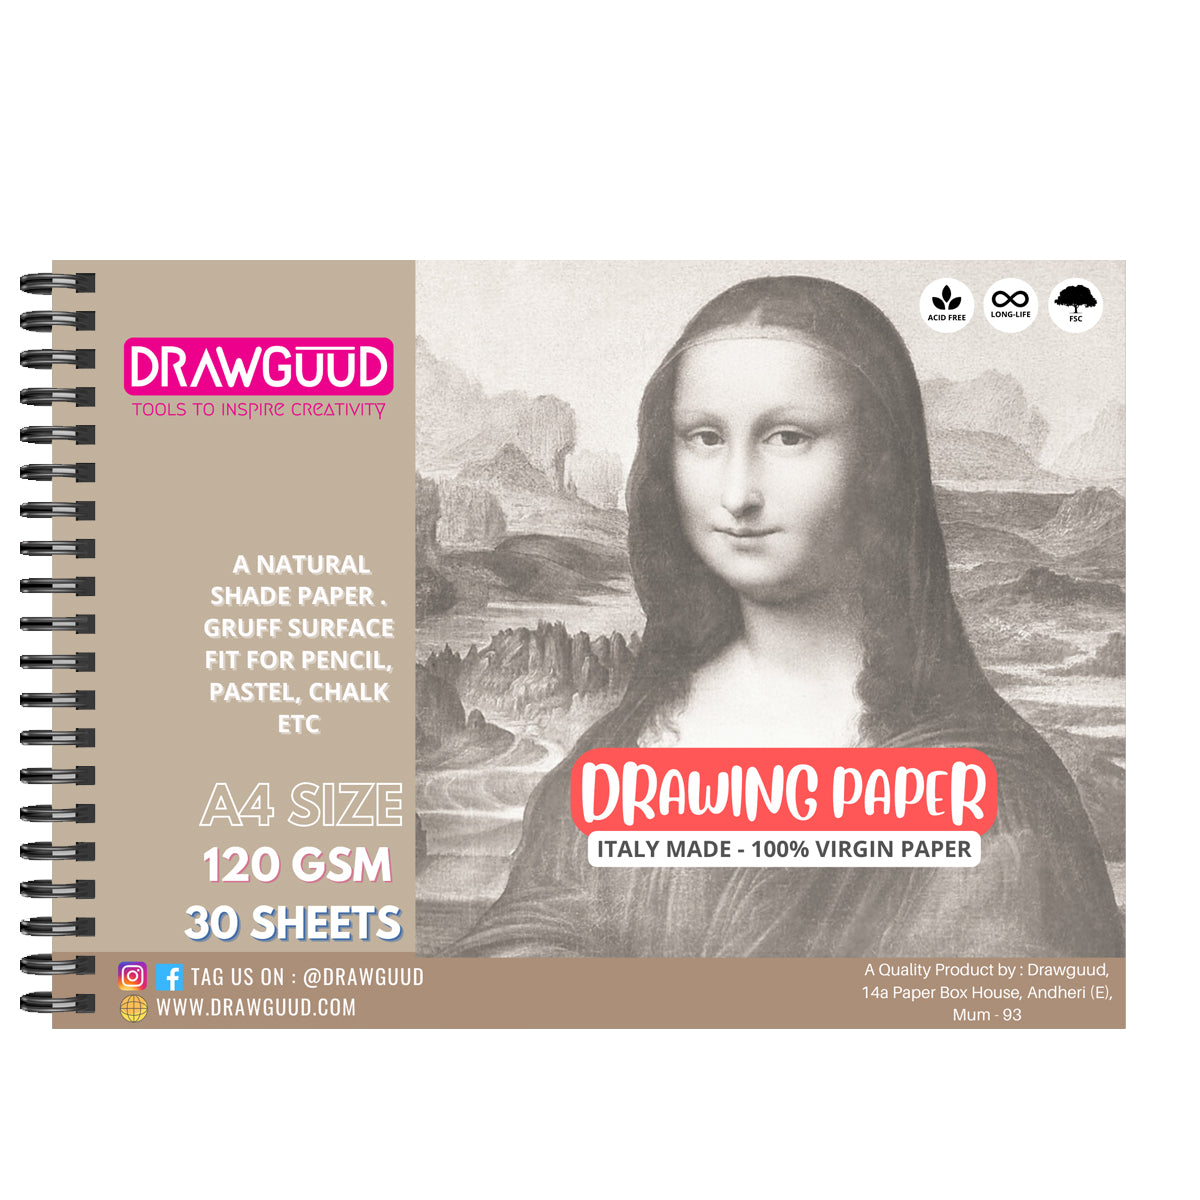 DRAWGUUD CANVAS TEXTURED PAPER 300 GSM SHEETS WIRO BOOK,WHITE – DRAWGUUD -  TOOLS TO INSPIRE CREATIVITY